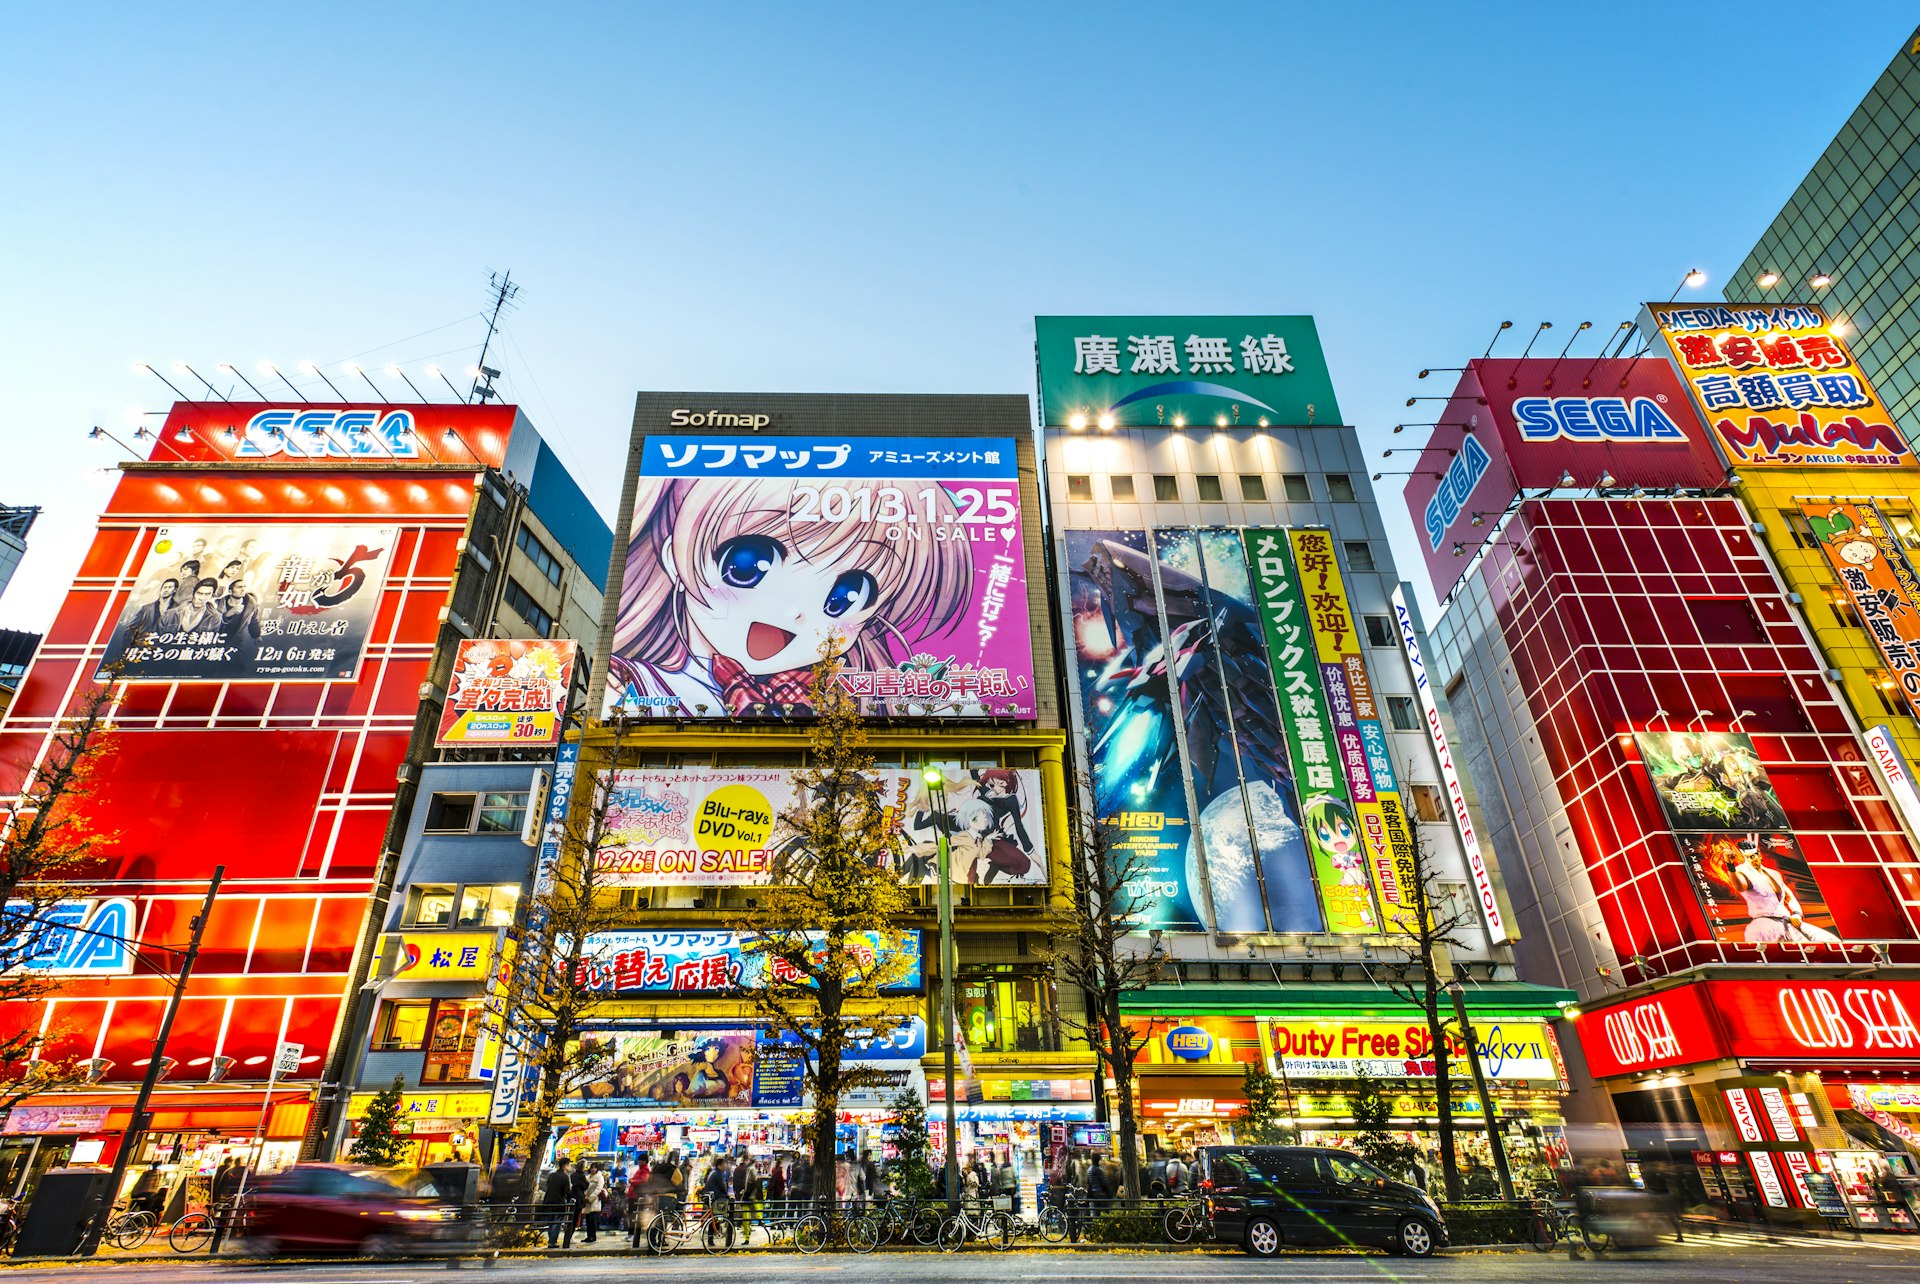 Akihabara is a major shopping district for electronics and pop-culture items